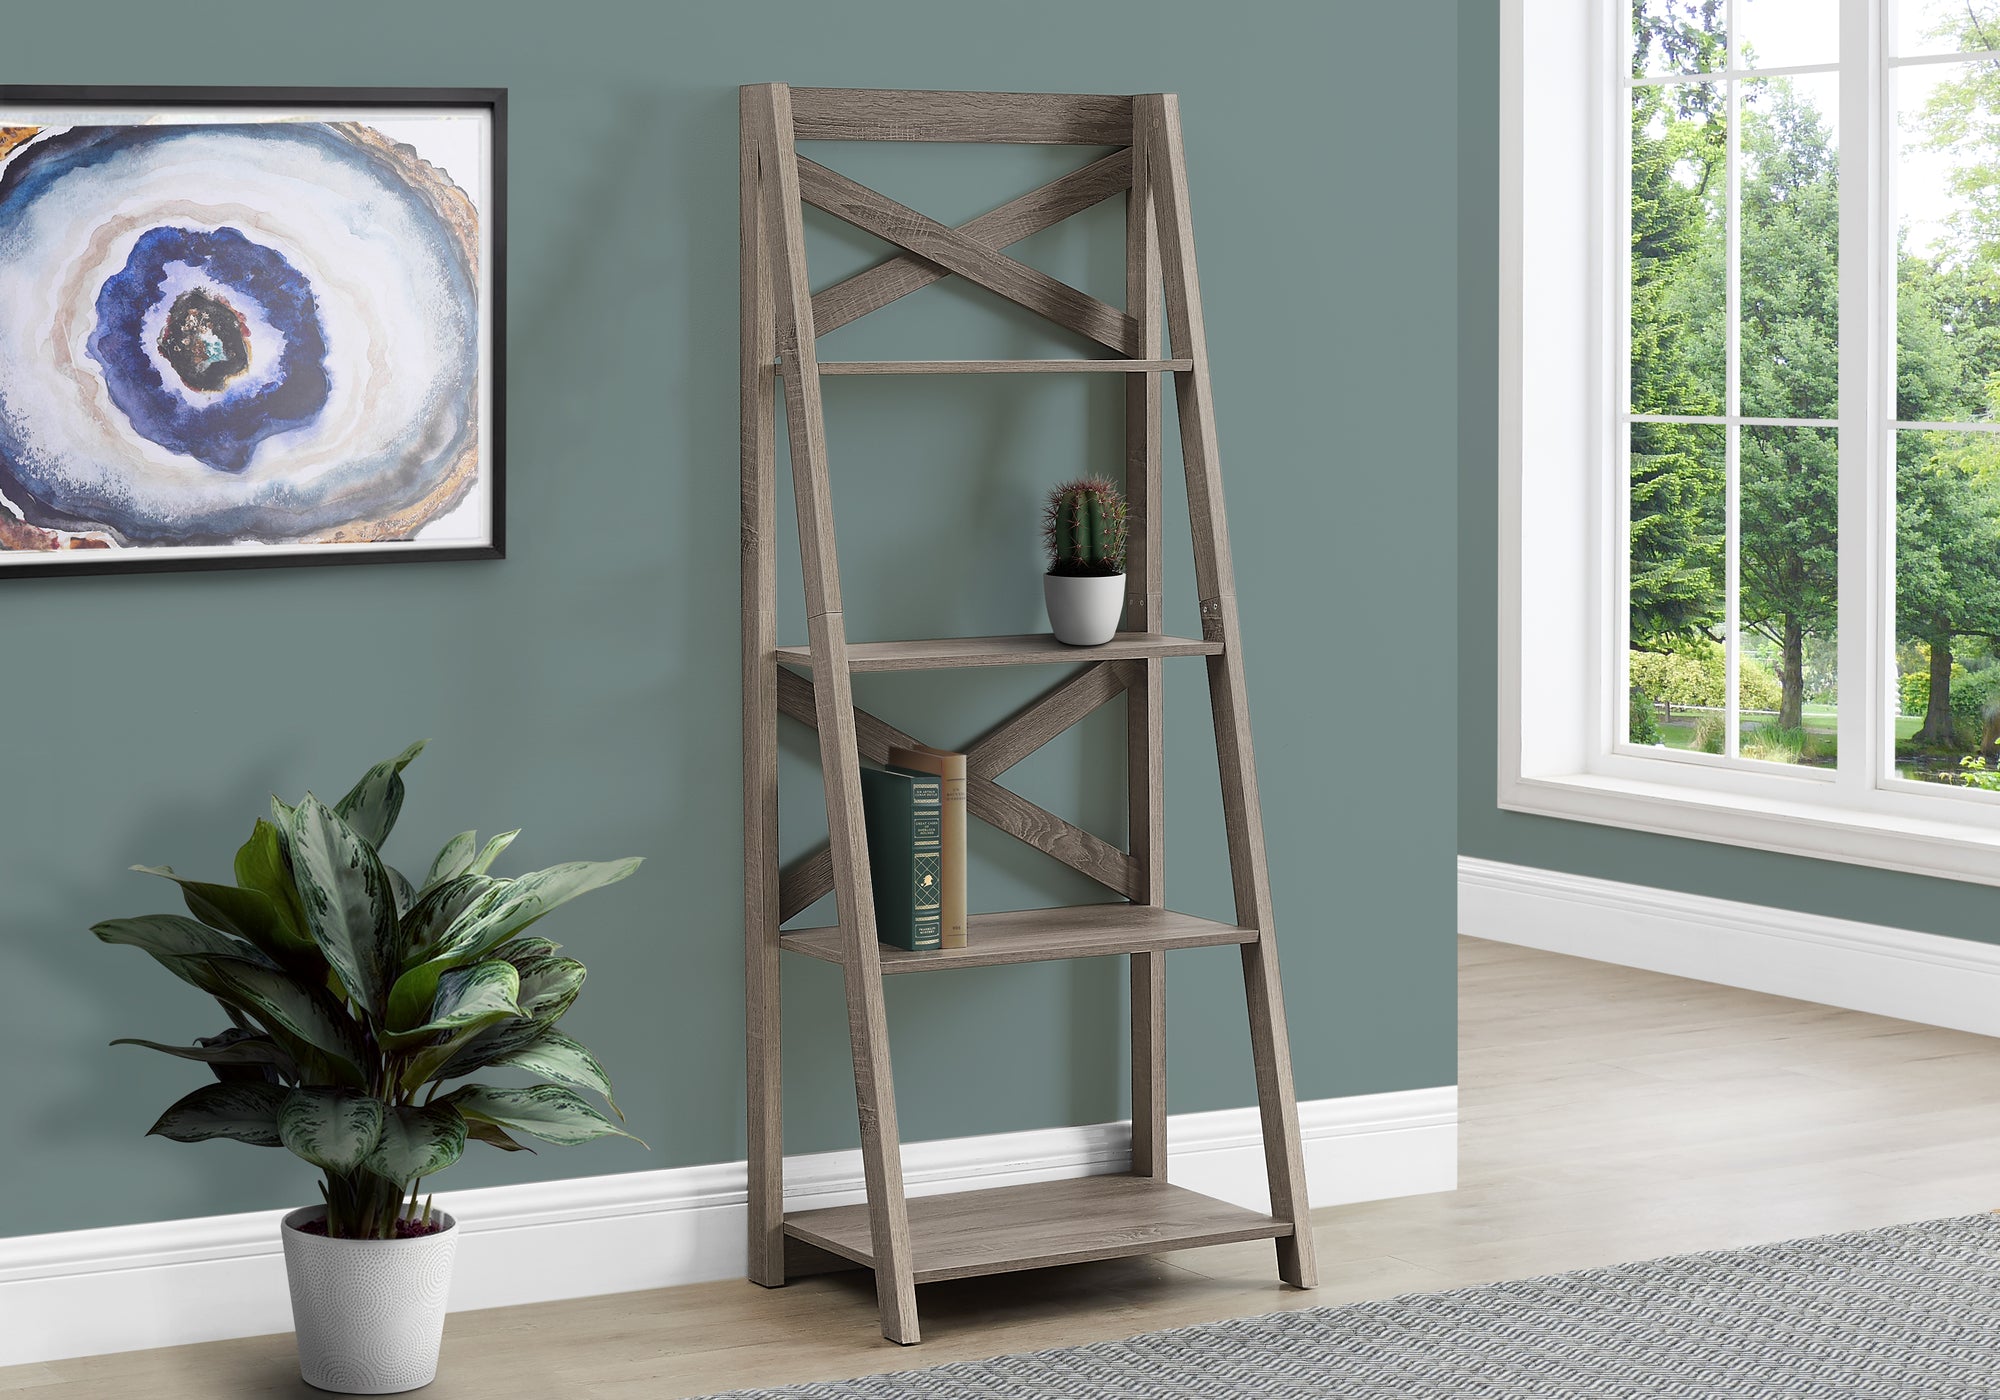 I 2779 - BOOKCASE - 60"H / DARK TAUPE LADDER WITH 4 SHELVES BY MONARCH SPECIALTIES INC